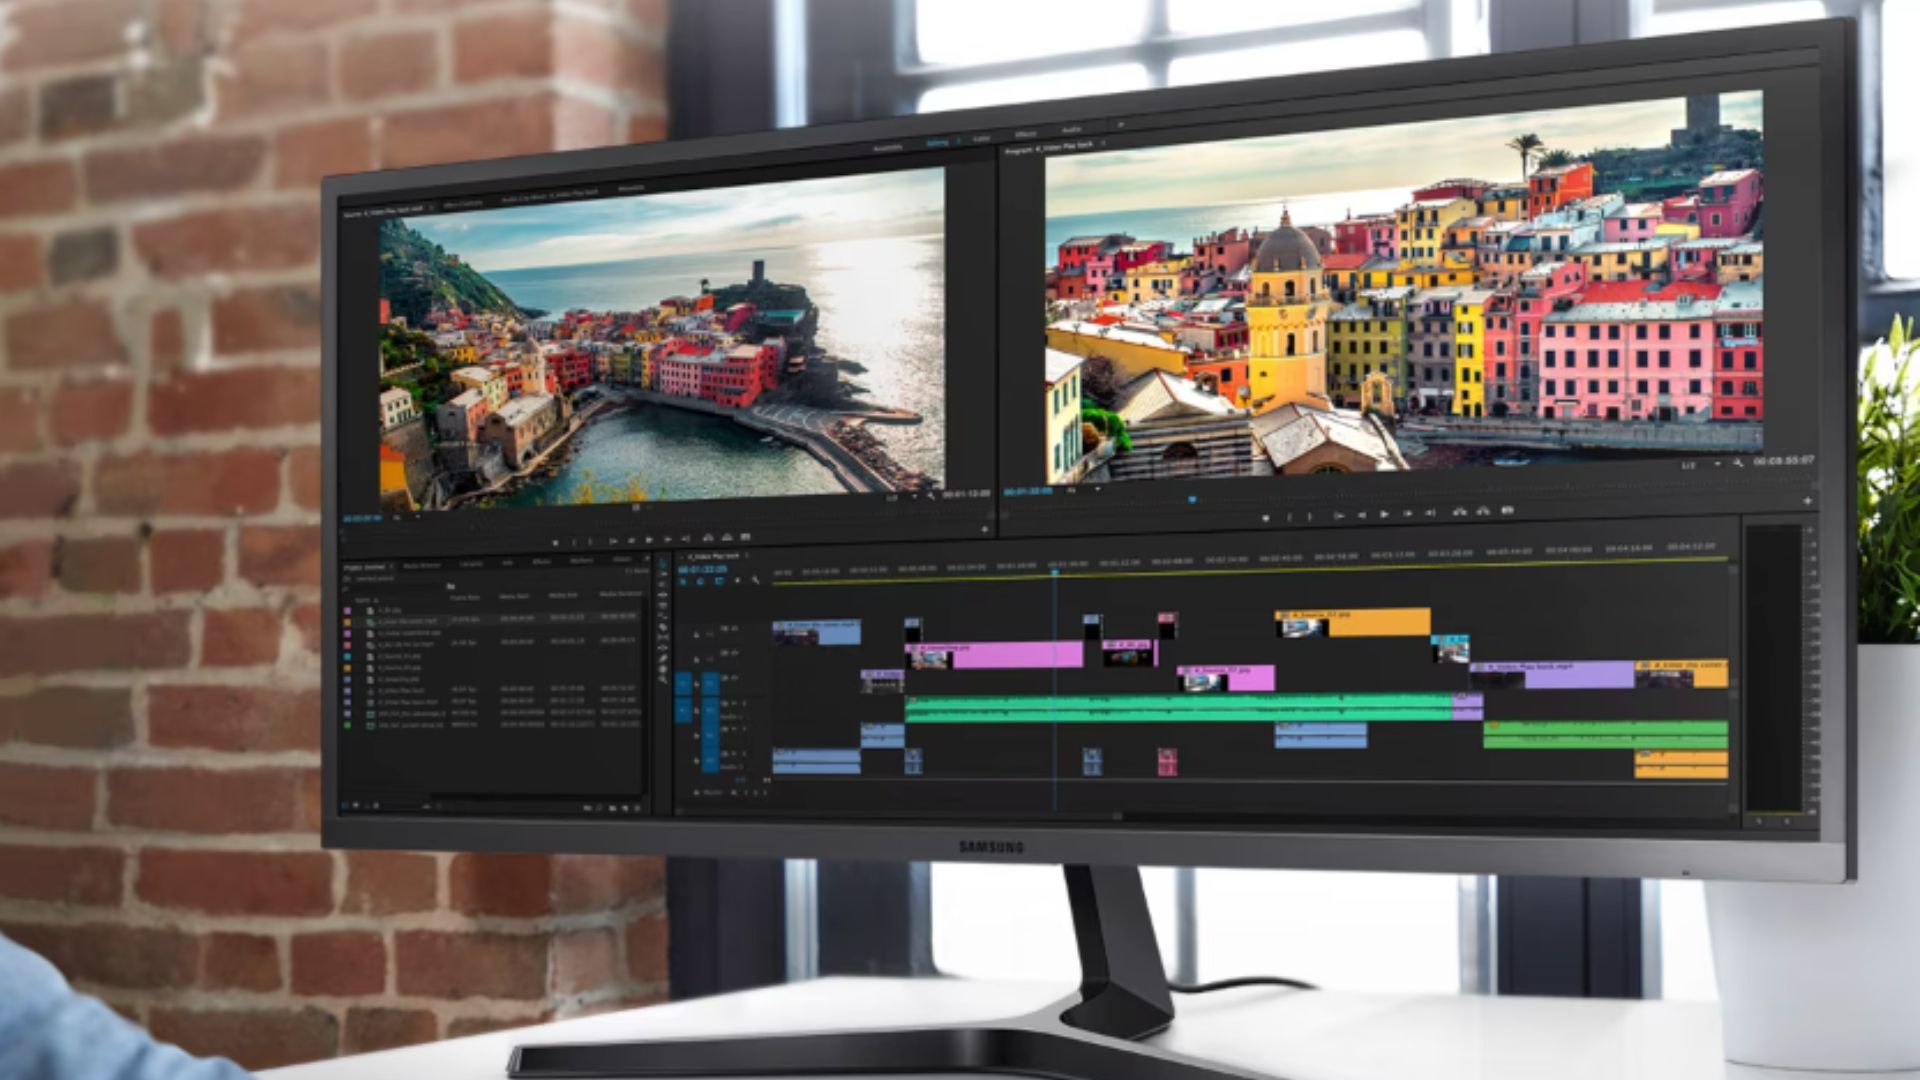 At -44%, this Samsung 34″ WQHD PC monitor will appeal to creatives and teleworkers